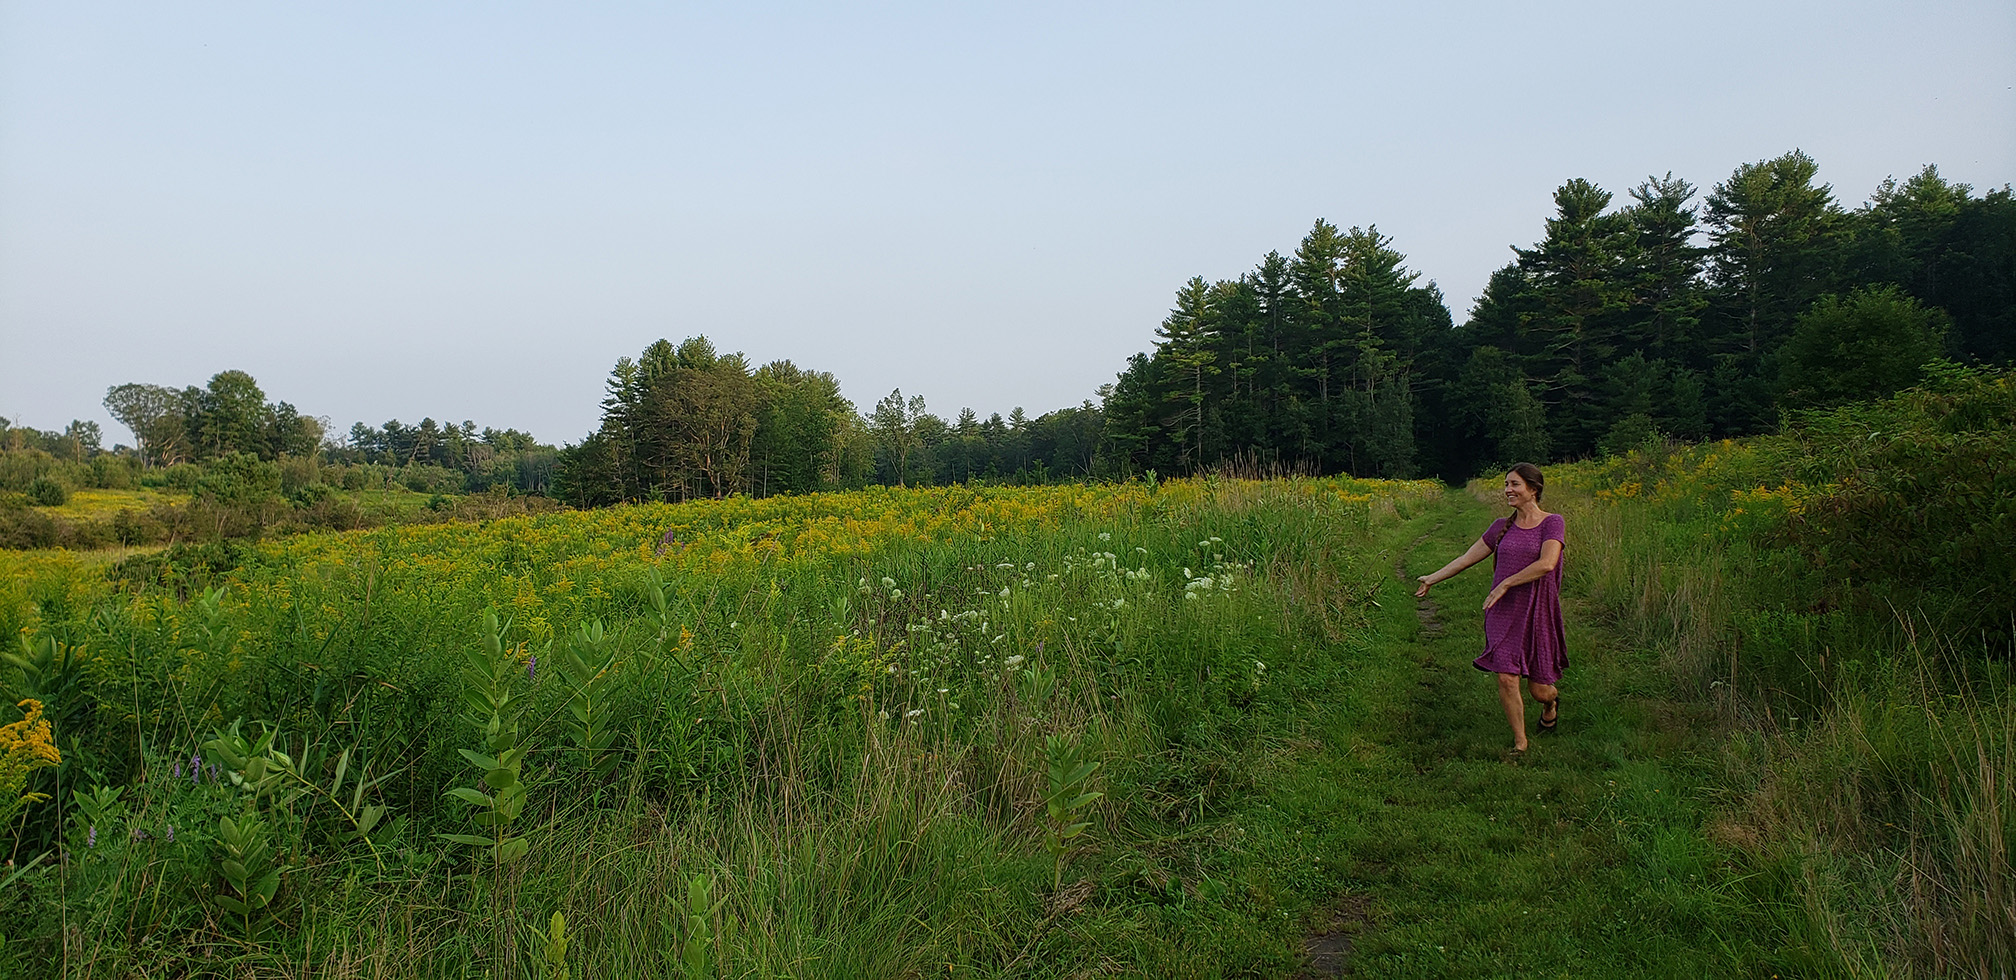 This photograph shows a wildflower meadow that is full of yellow flowers. A young woman with dark hair and wearing a purple dress is running along the edge of the meadow. Behind the meadow is a line of green trees. The sky is a clear blue.